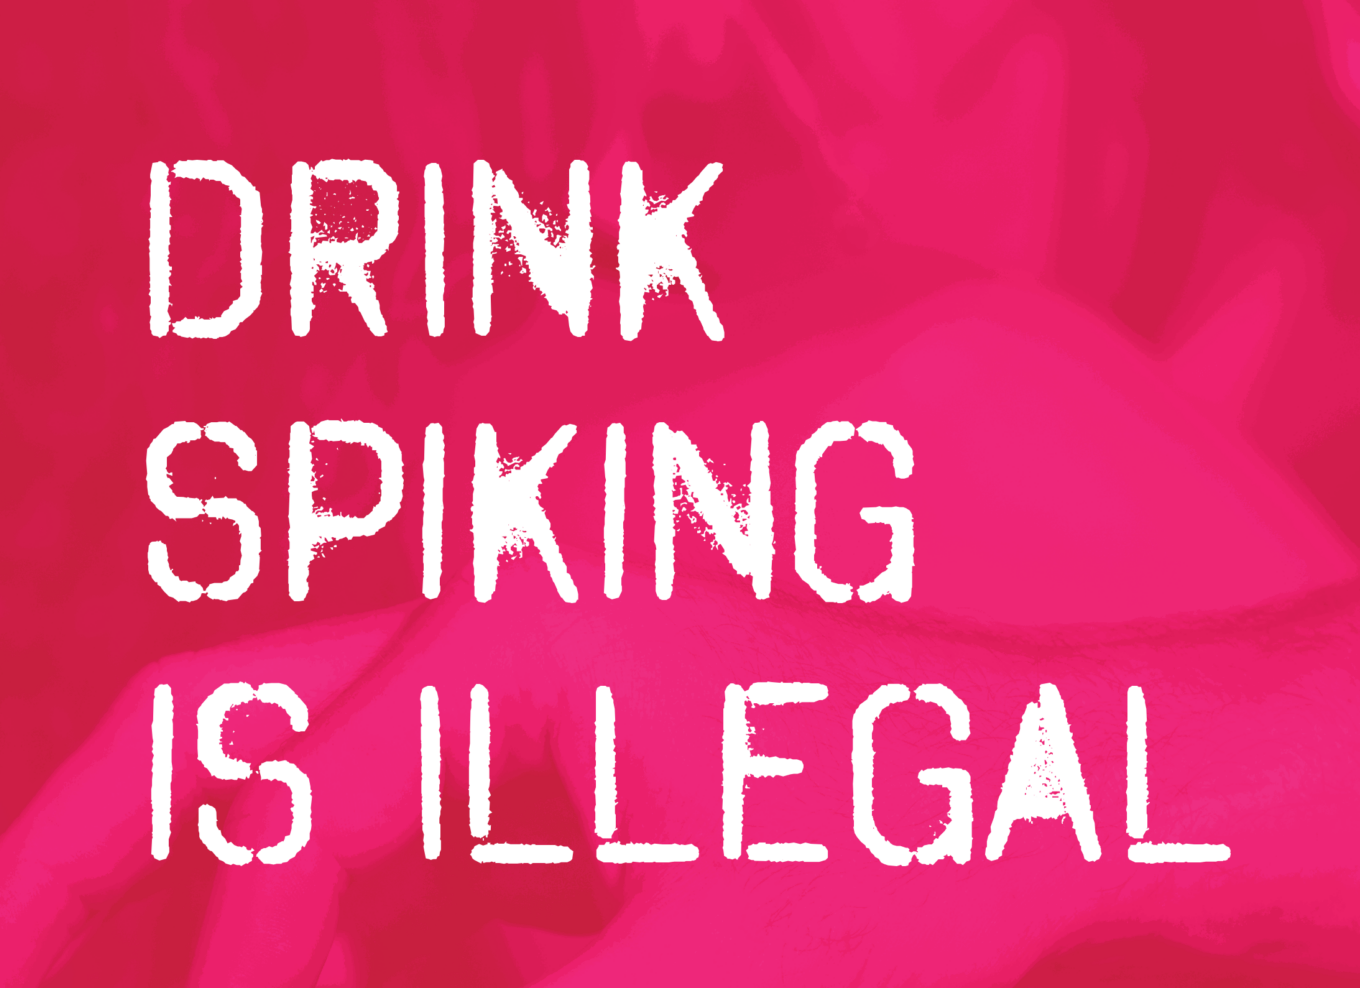 Drink spiking is illegal